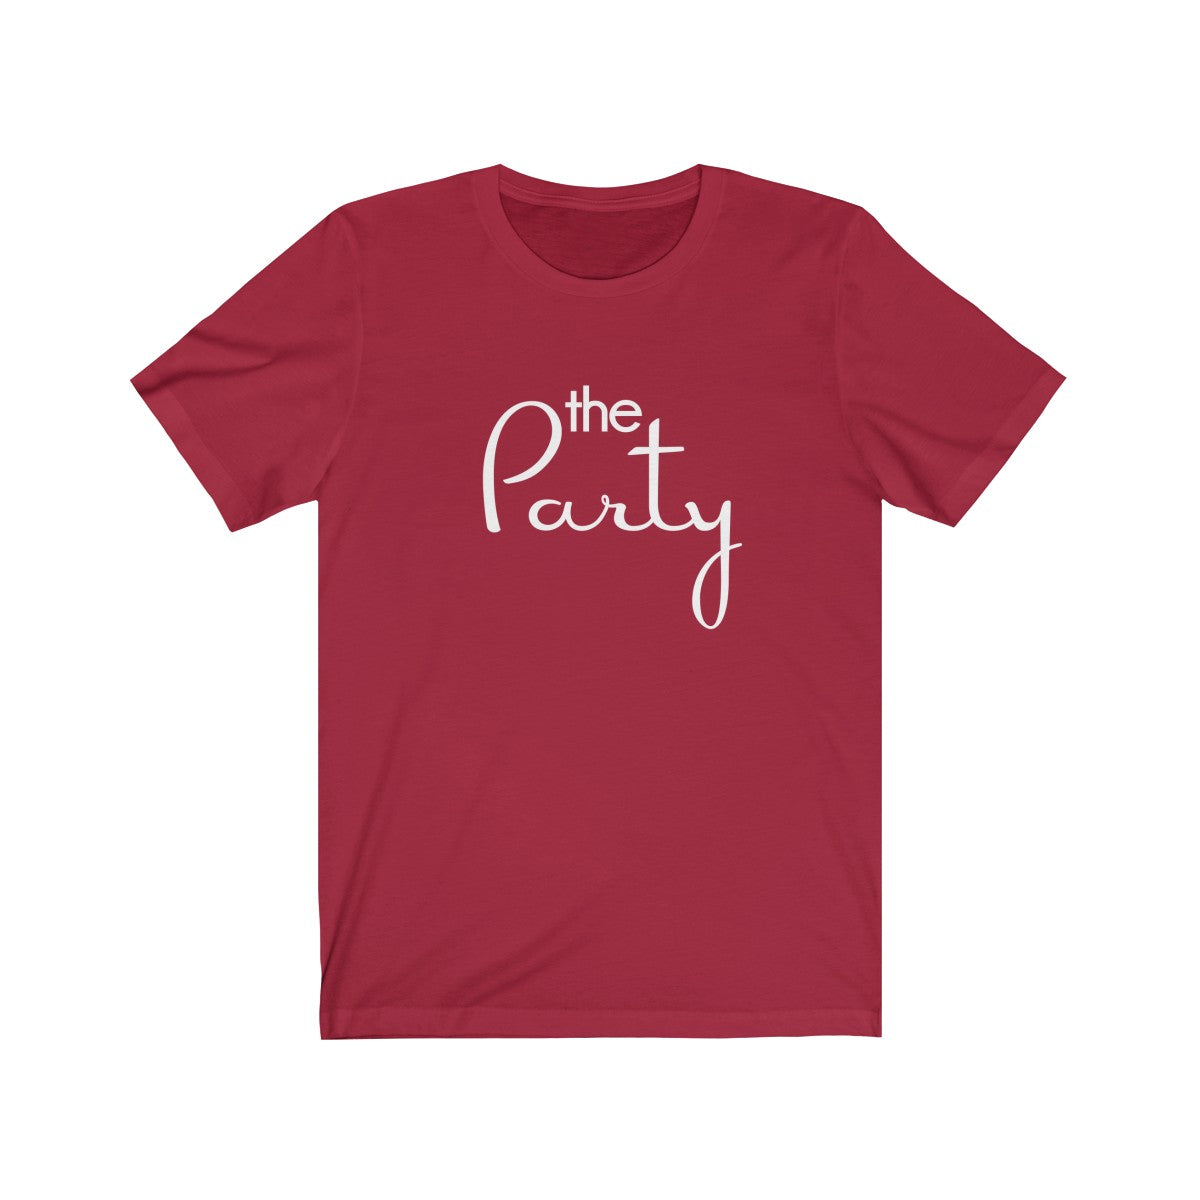 Tee The Party White Print Short Sleeve - elrileygifts